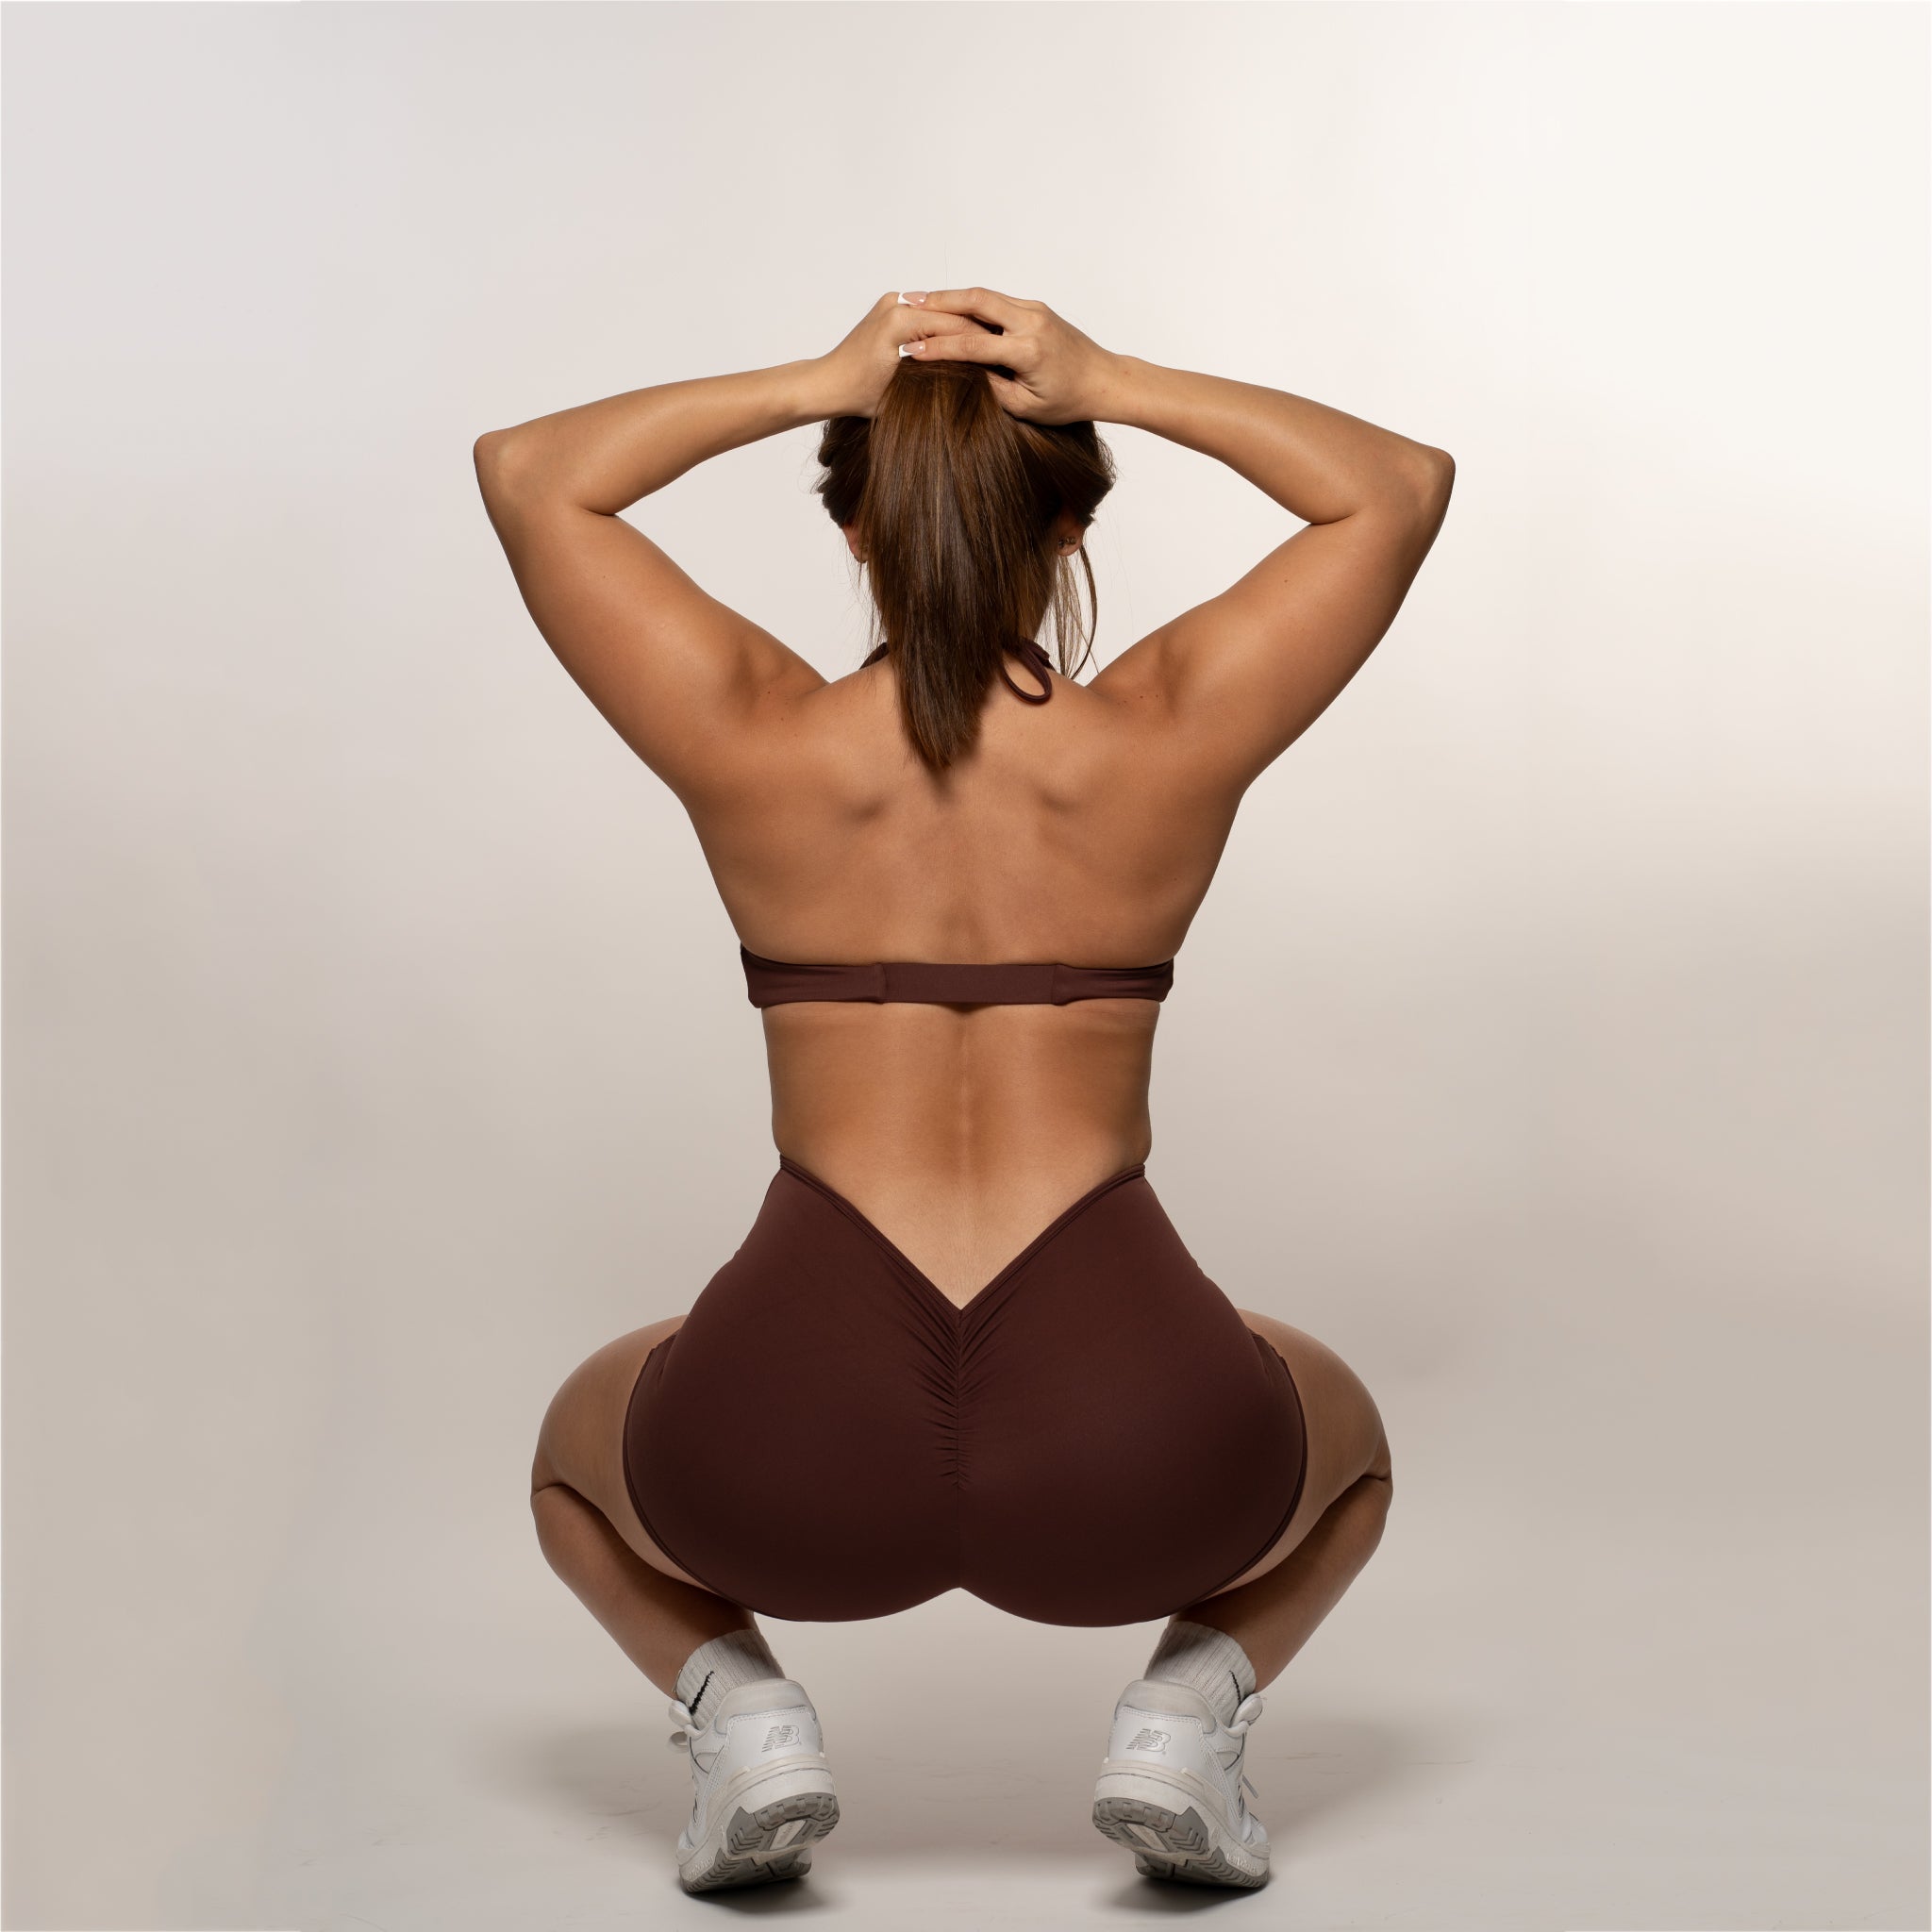 Crush Bodysuit Shorts - Brown: The Perfect Activewear for Women